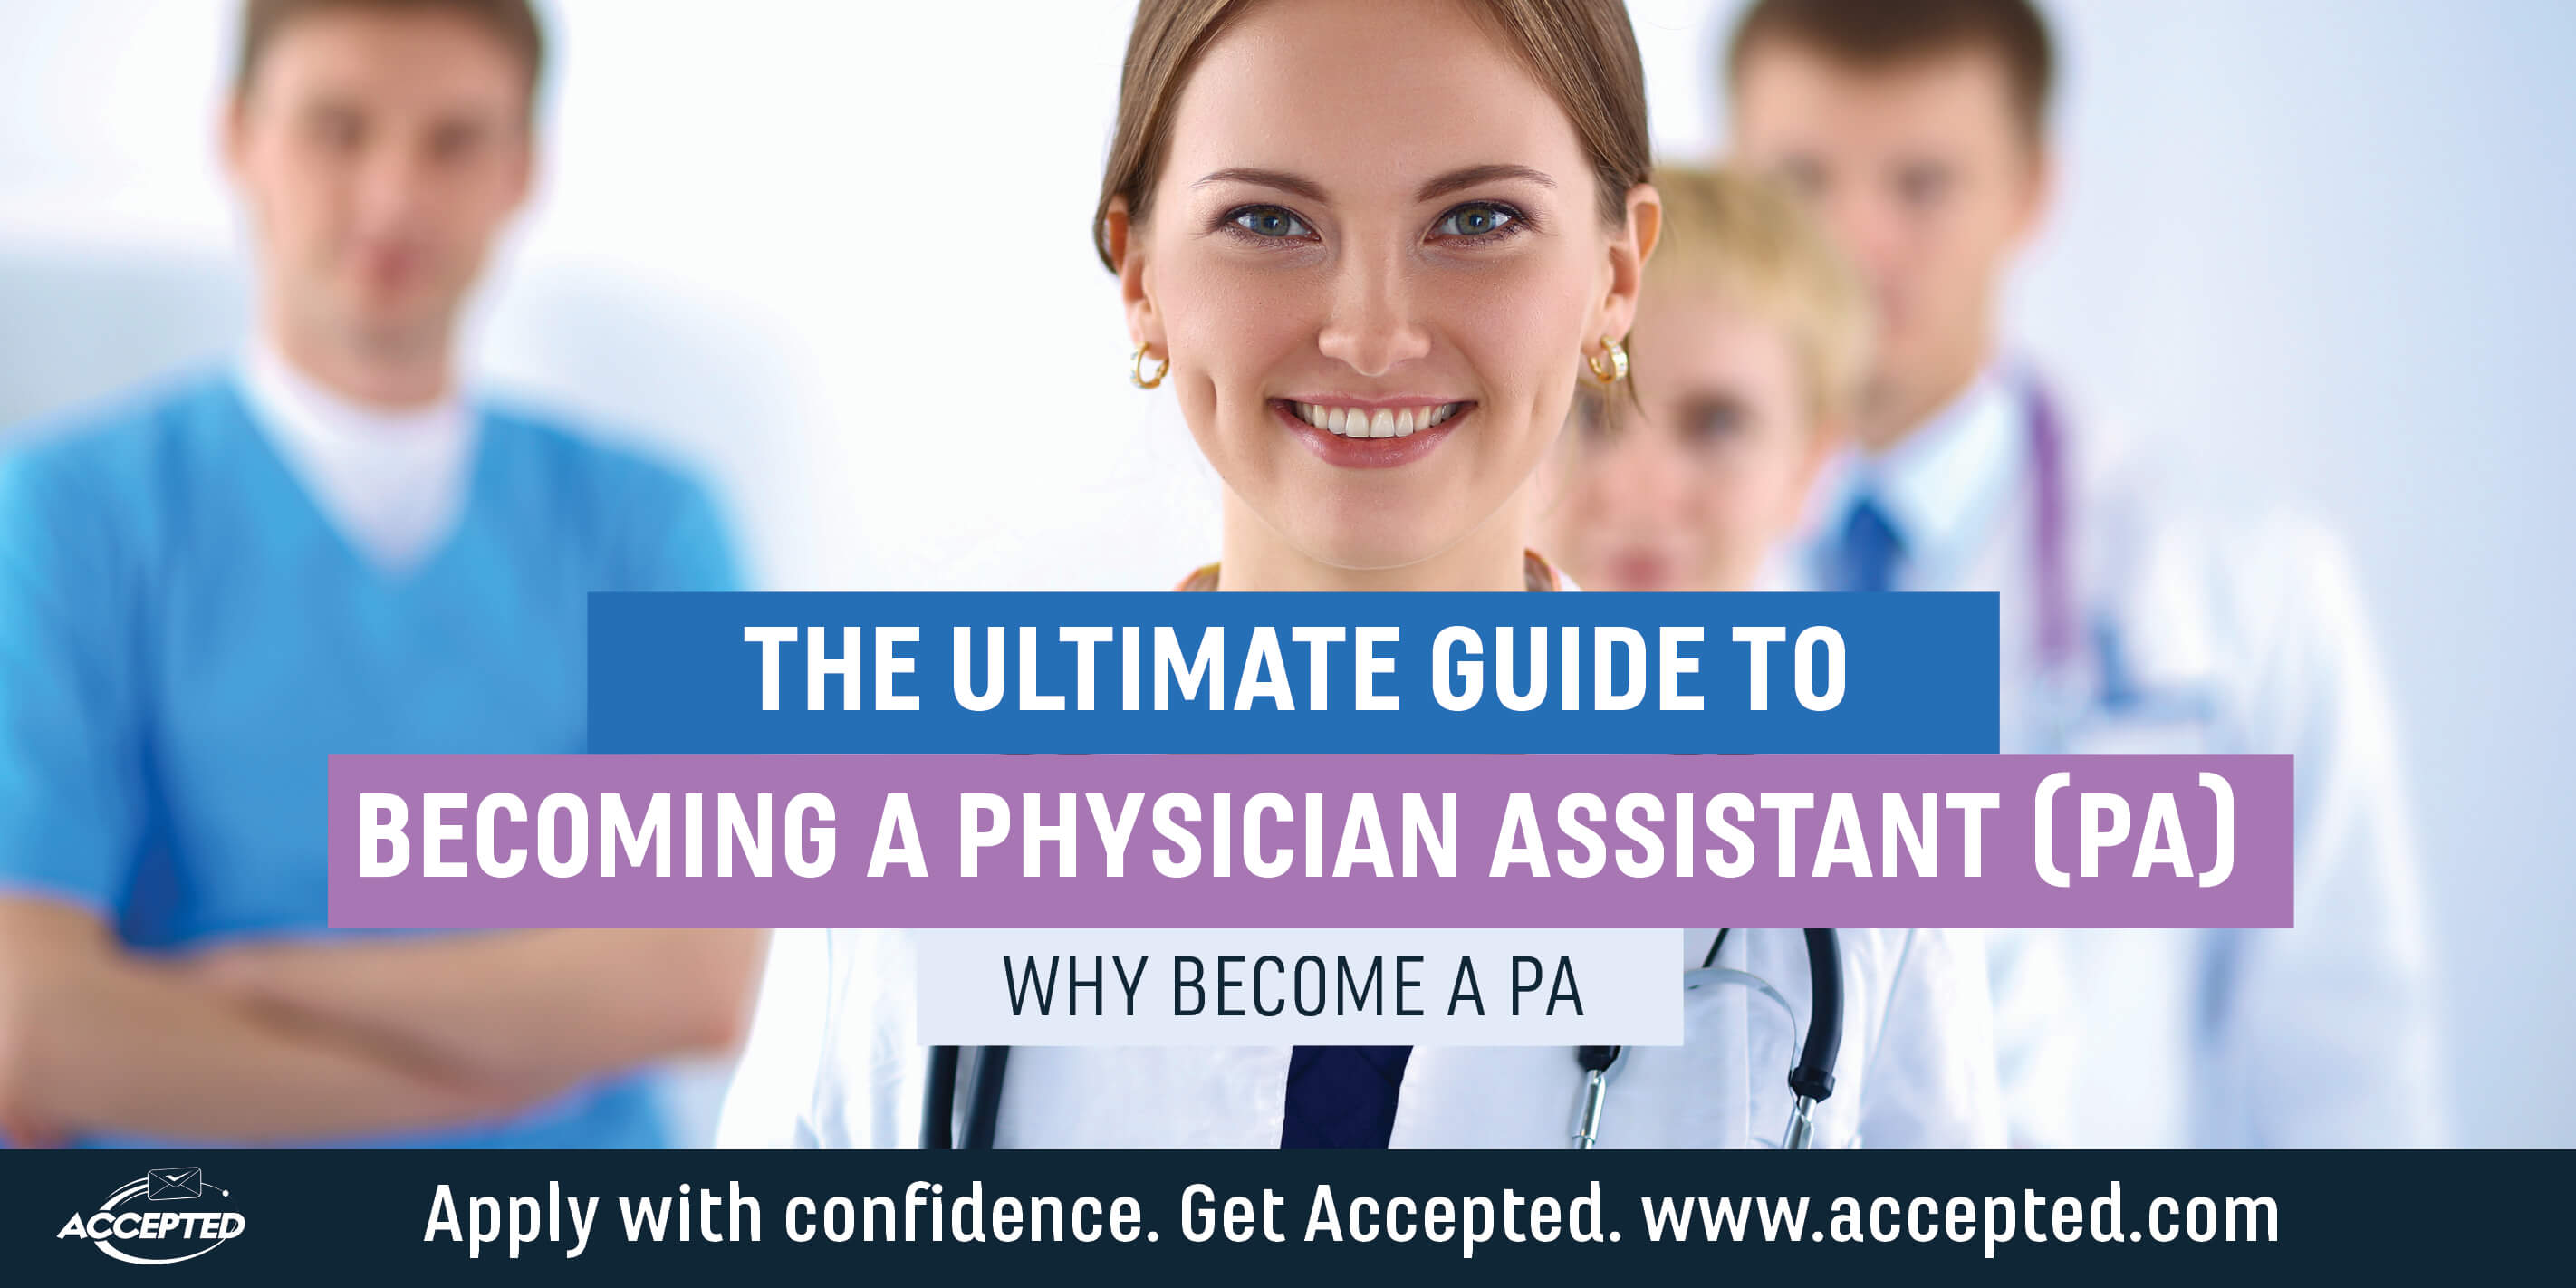 The ultimate to becoming a PA why become a PA